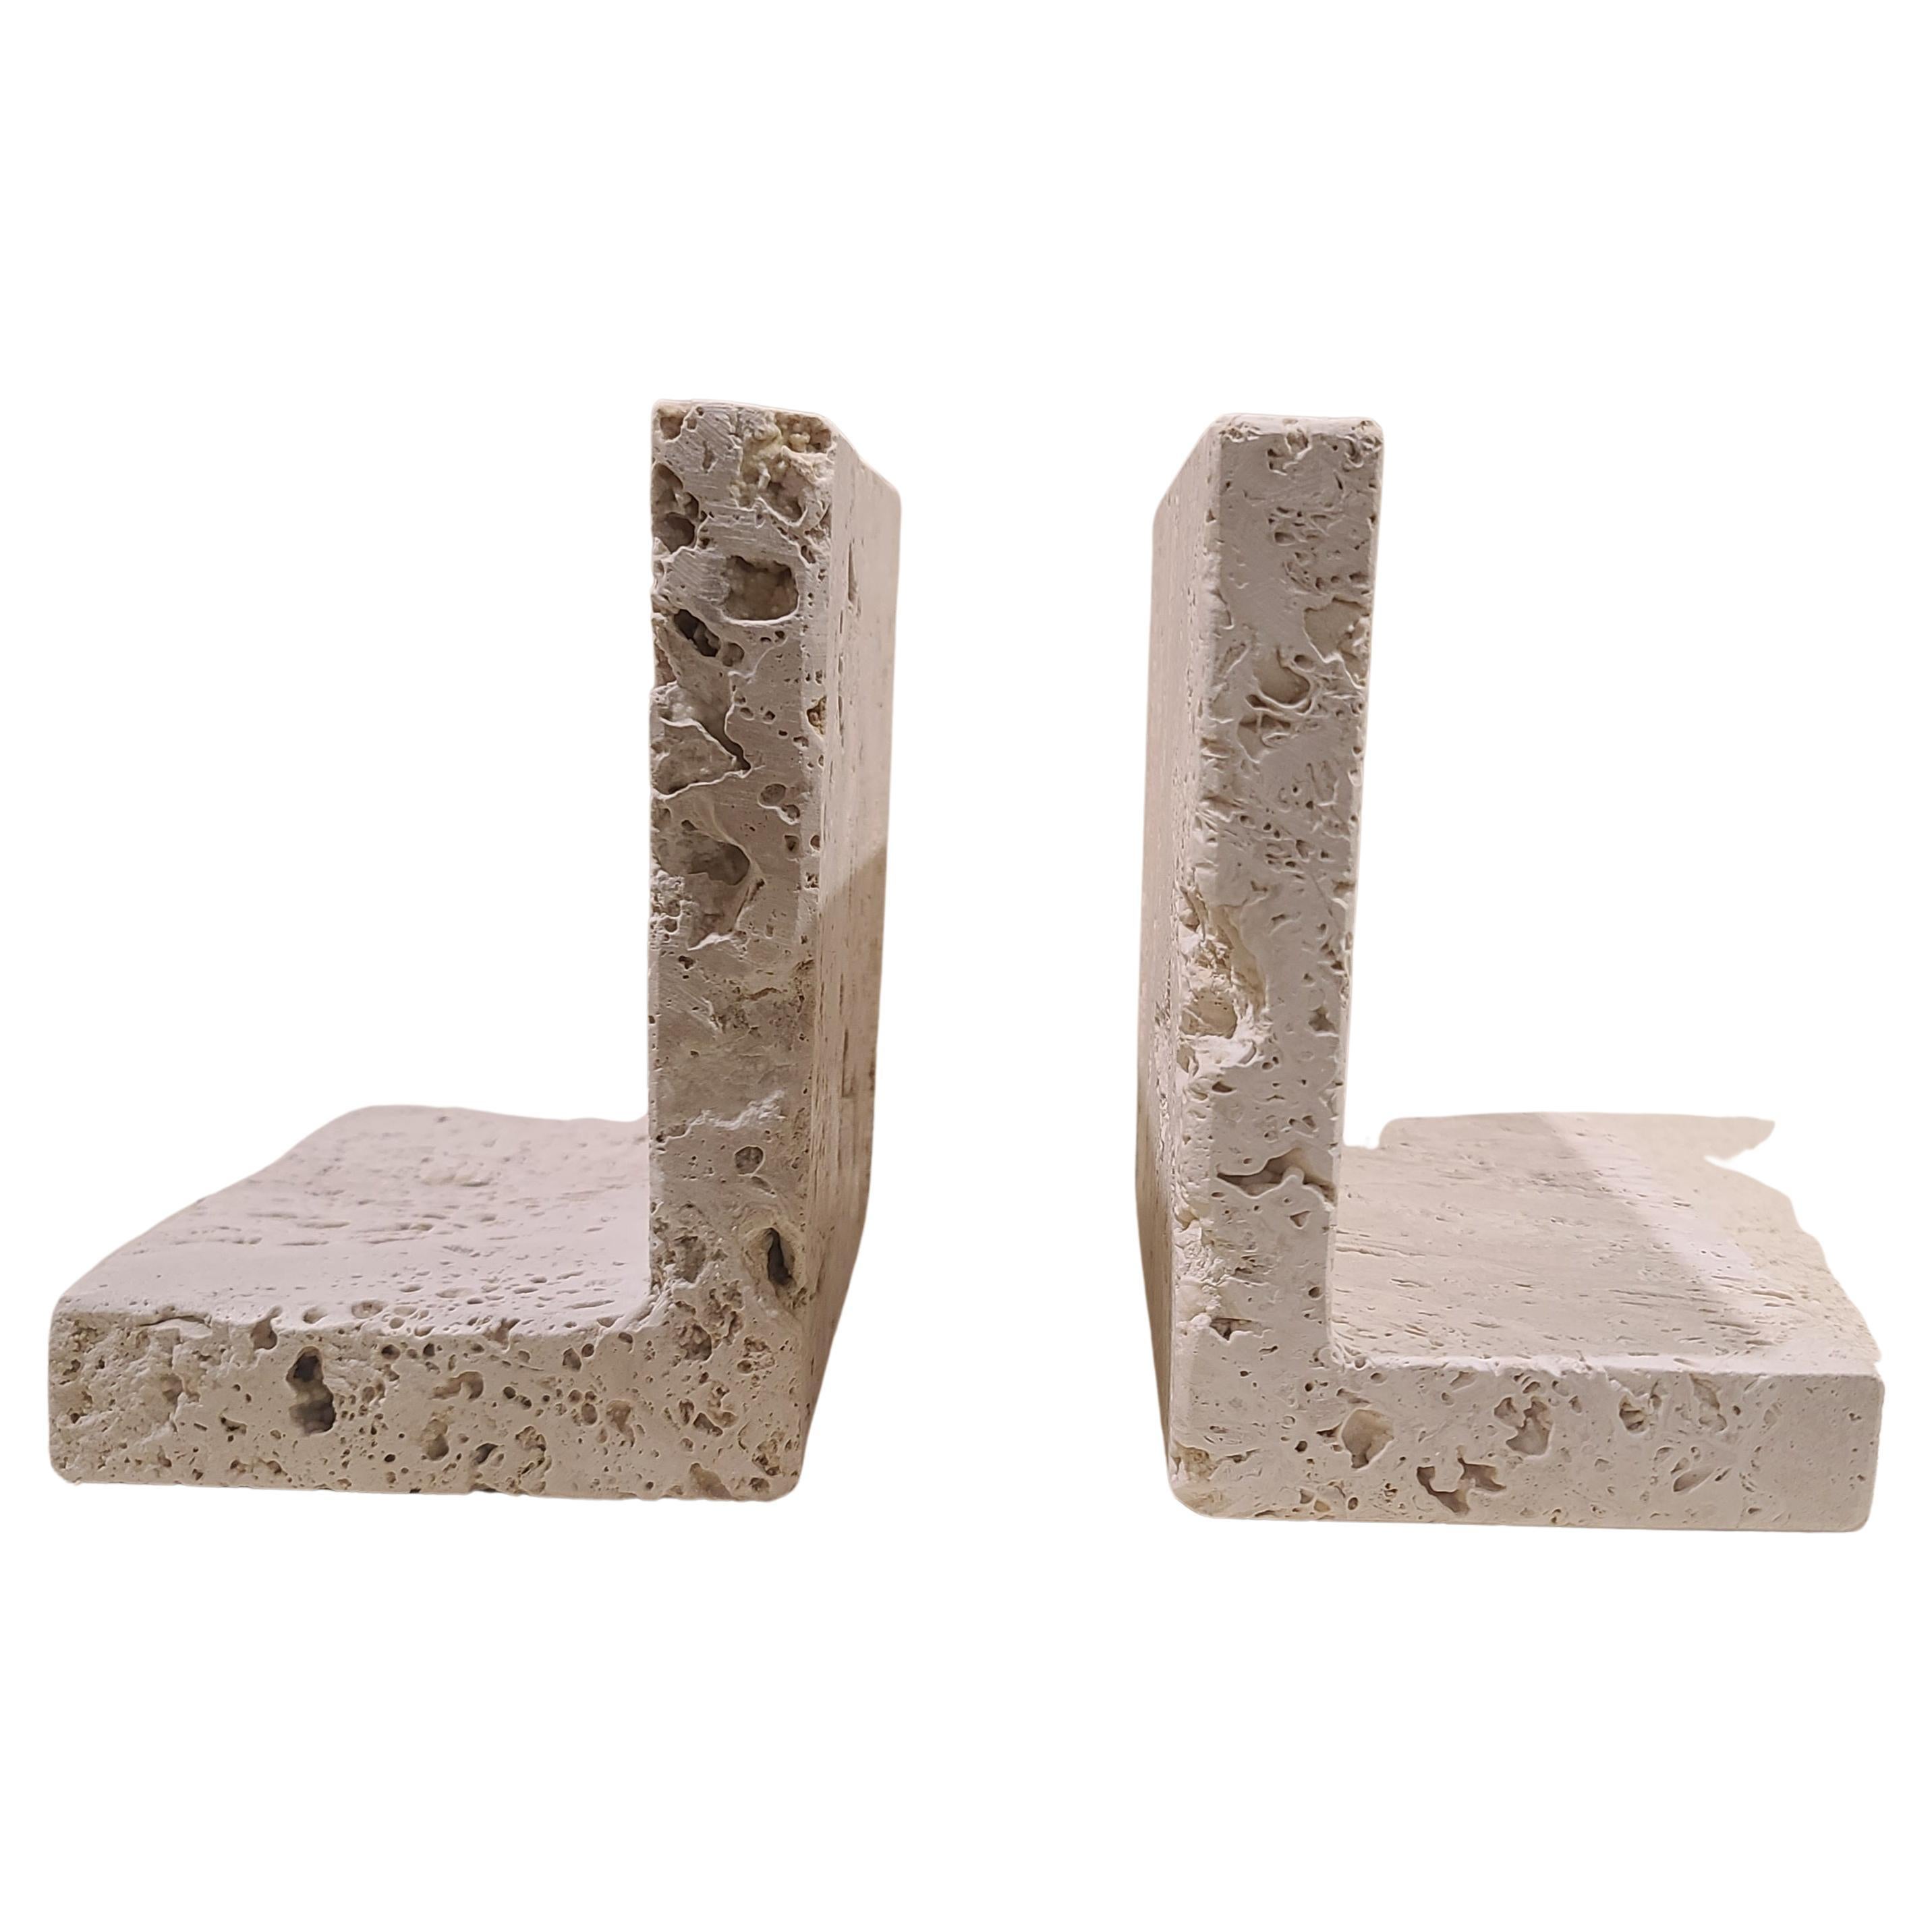 Travertine bookends are elegant and functional accessories for organizing and displaying books. Crafted from natural travertine stone, these bookends often feature unique patterns and earthy tones, adding a touch of sophistication to any bookshelf